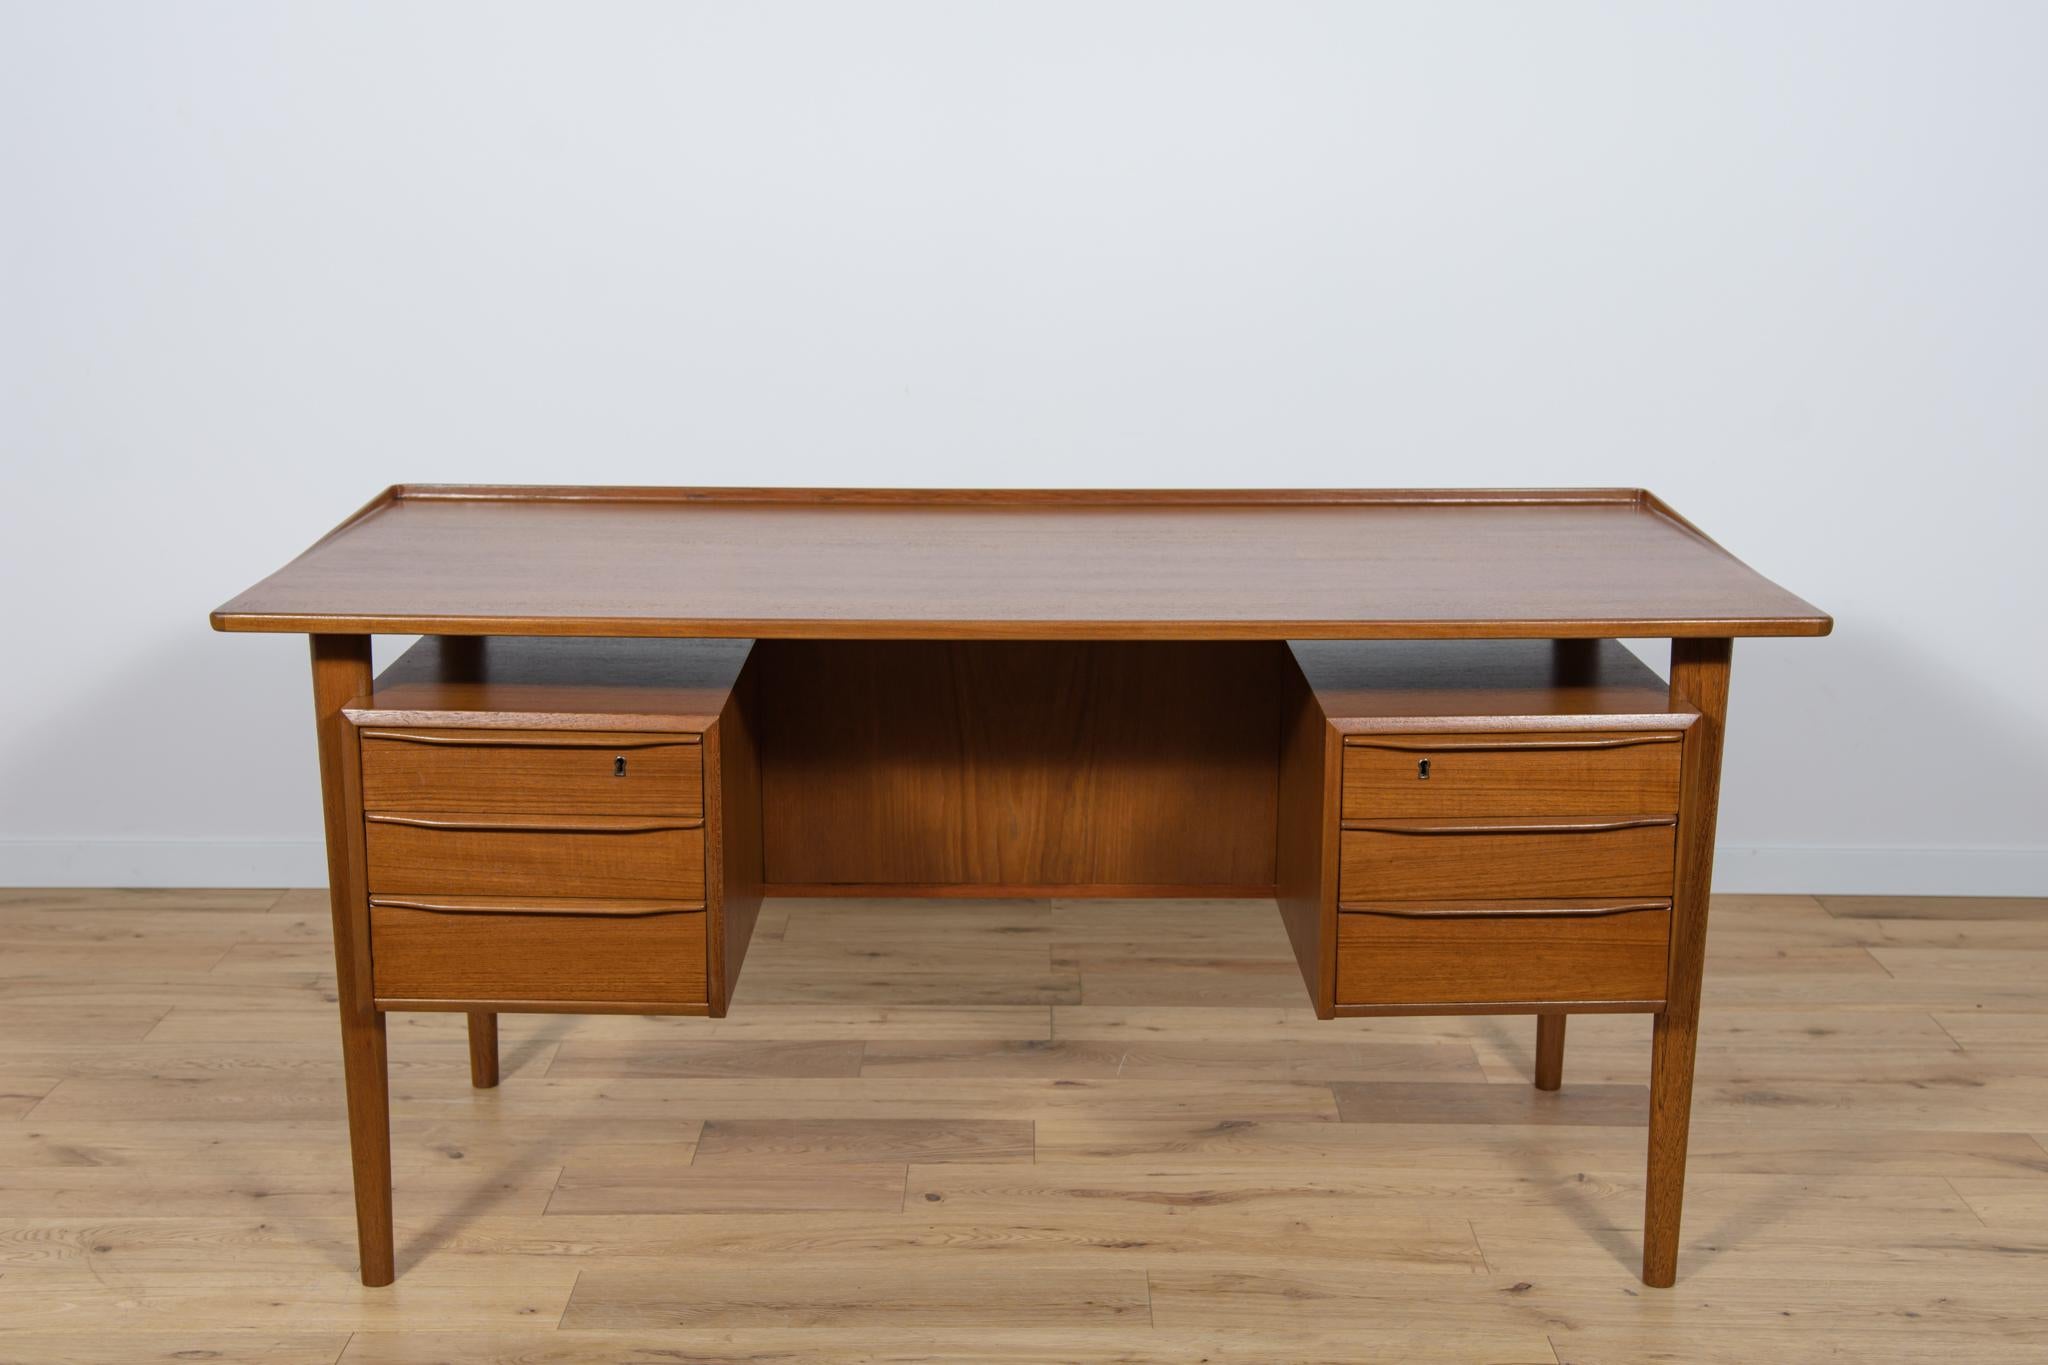 A desk designed by Danish designer Peter Løvig Nielsen in the 1960s. Desks are characterized by original, extraordinary design and high-quality workmanship made of high-quality materials. The desk has a top with a contoured edge. The desk is made of